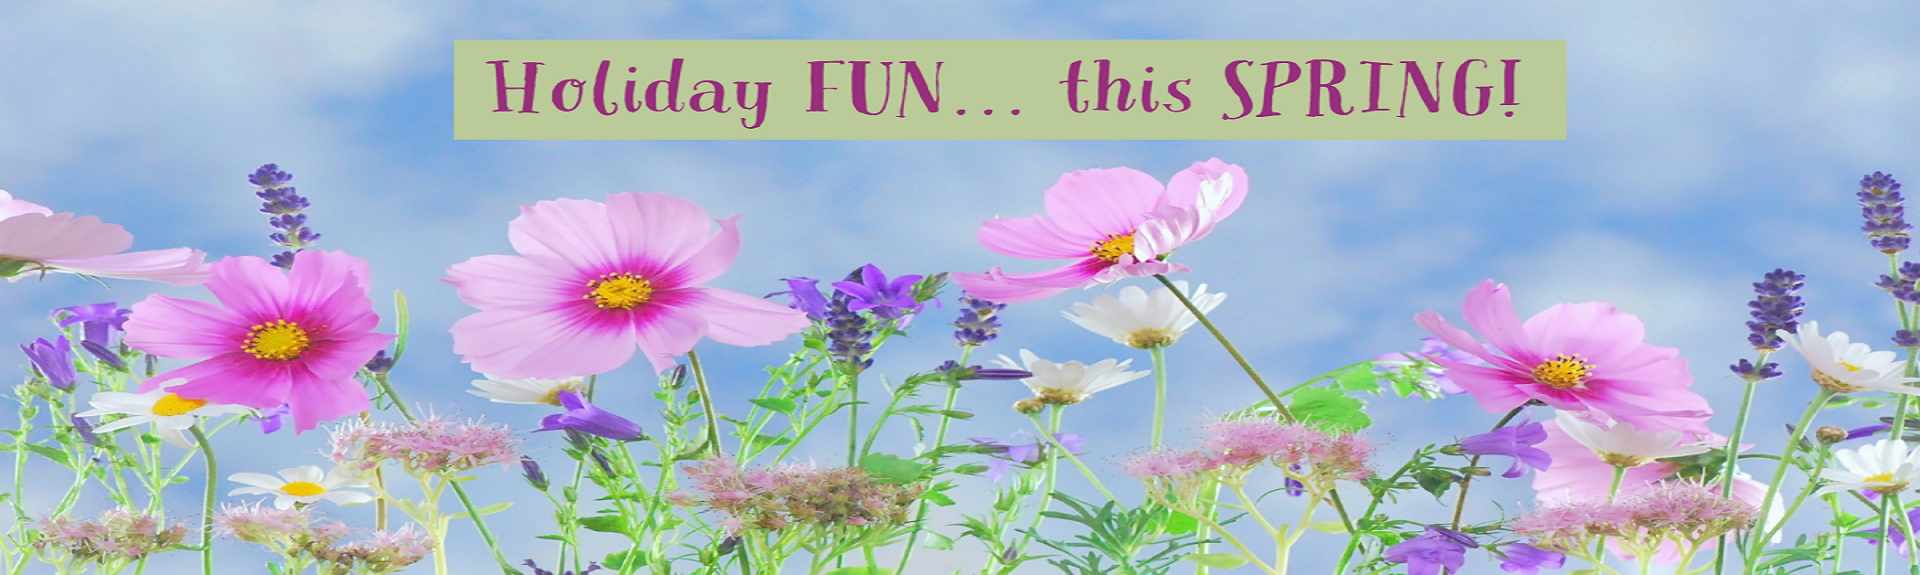 Spring Fun at Candle Avenue